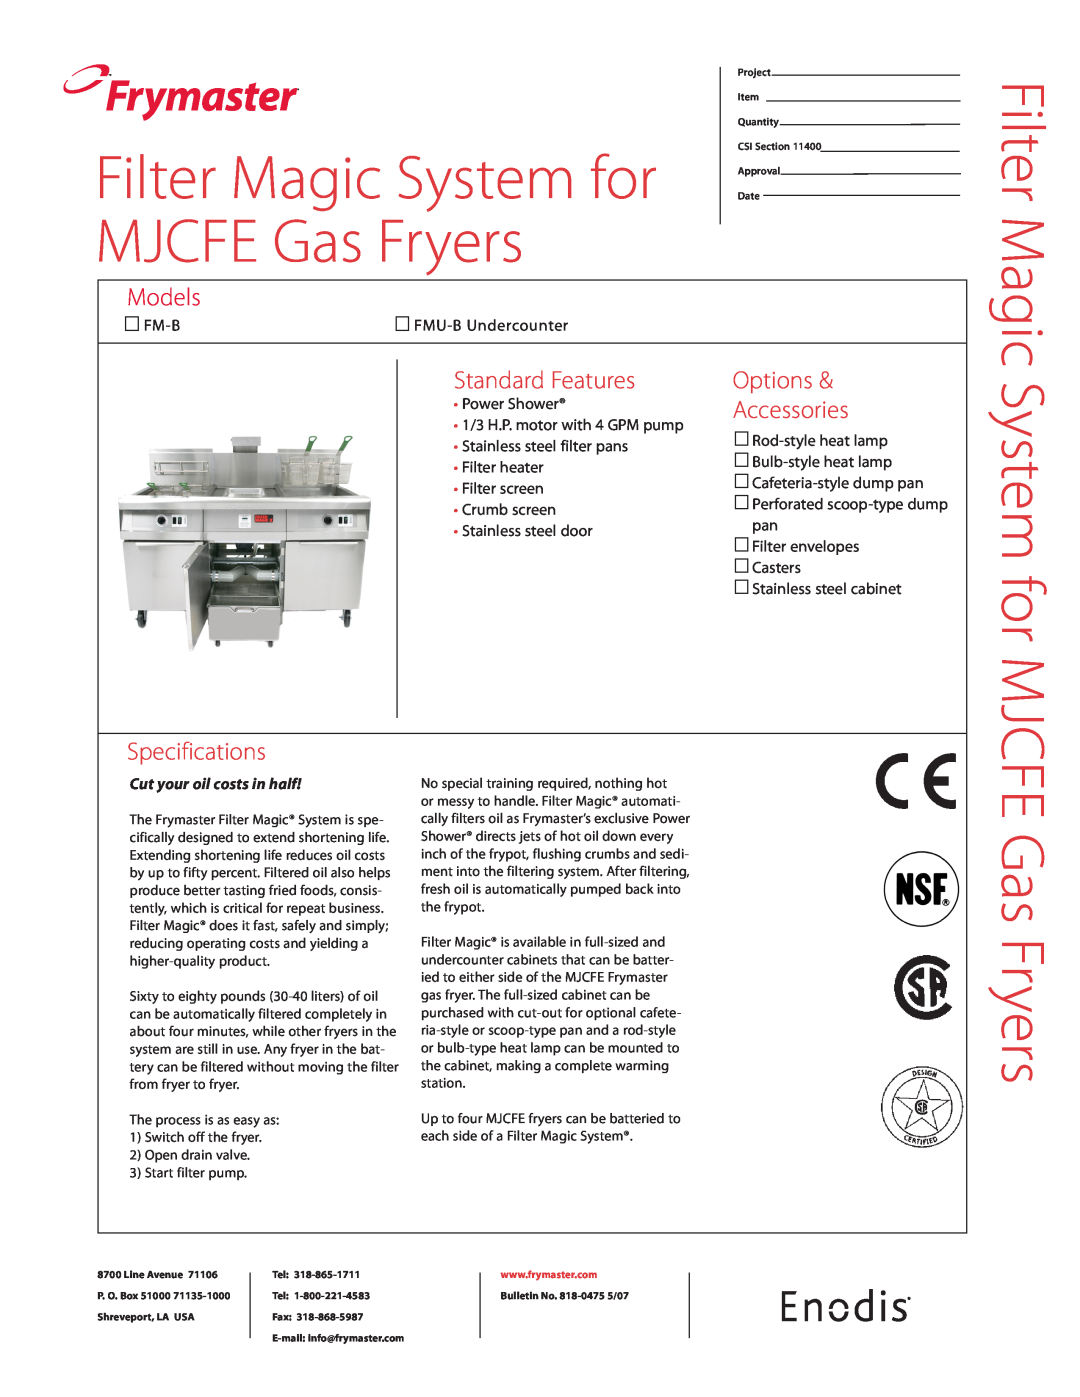 Frymaster FM-B specifications Frymaster, Filter, Magic System for MJCFE Gas Fryers, Models, Standard Features, Options 